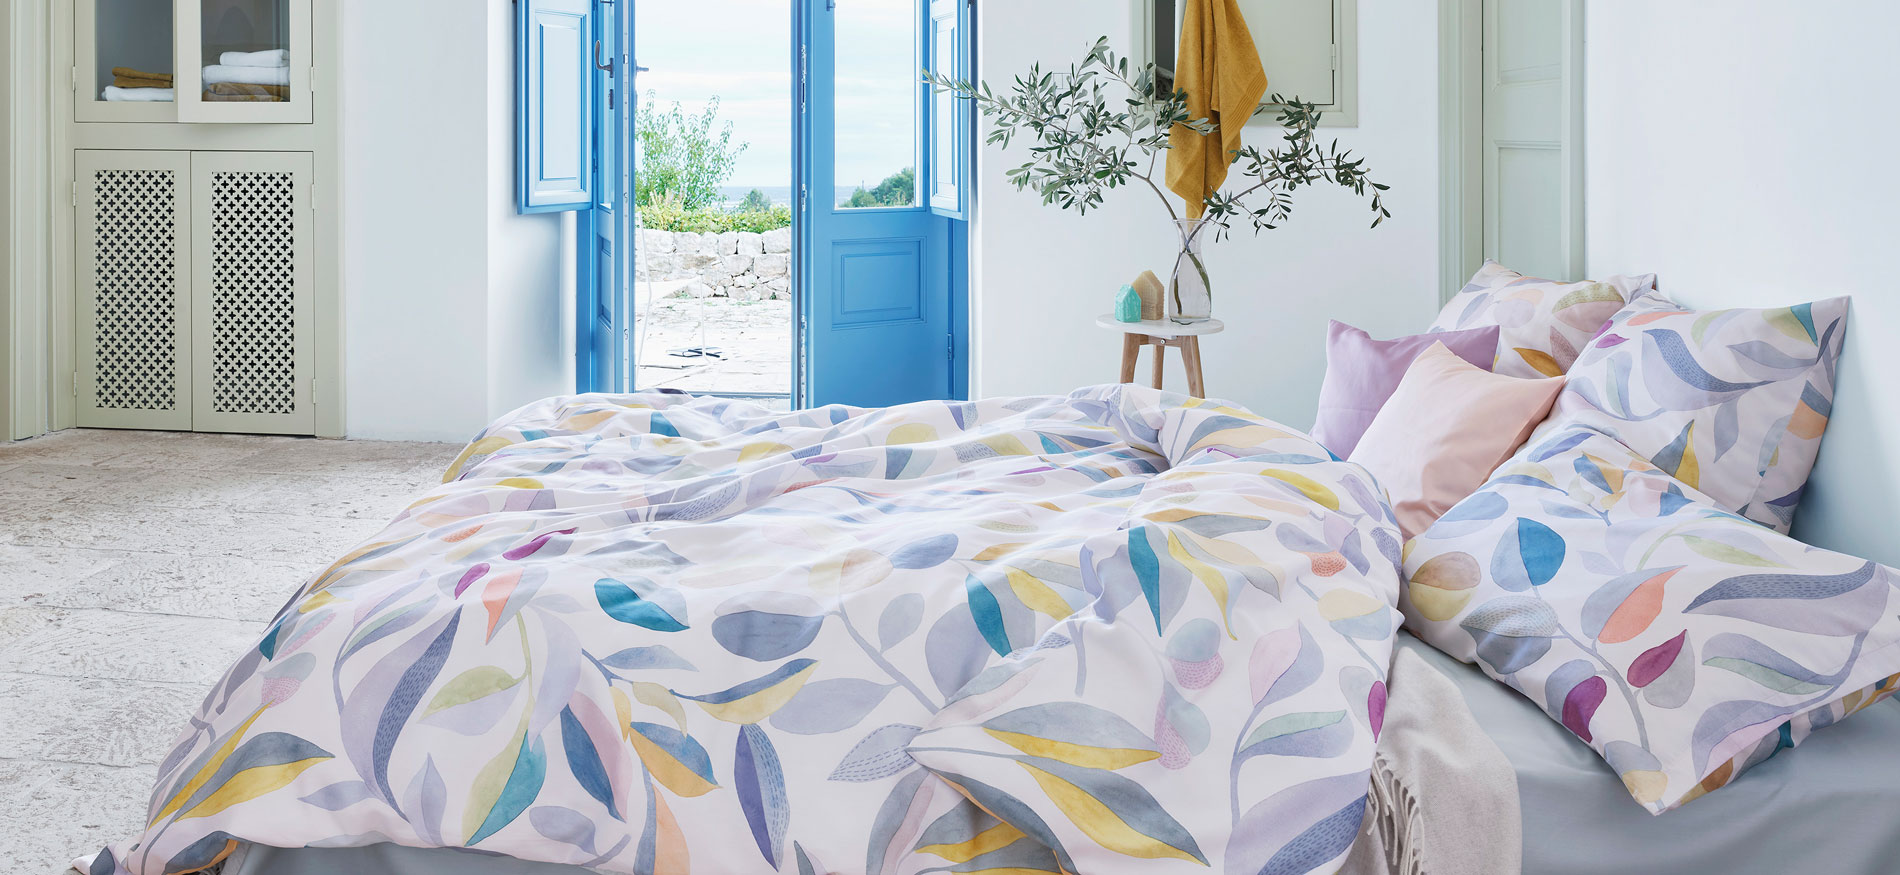 Special offers and discontinued items finest Swiss bed linen